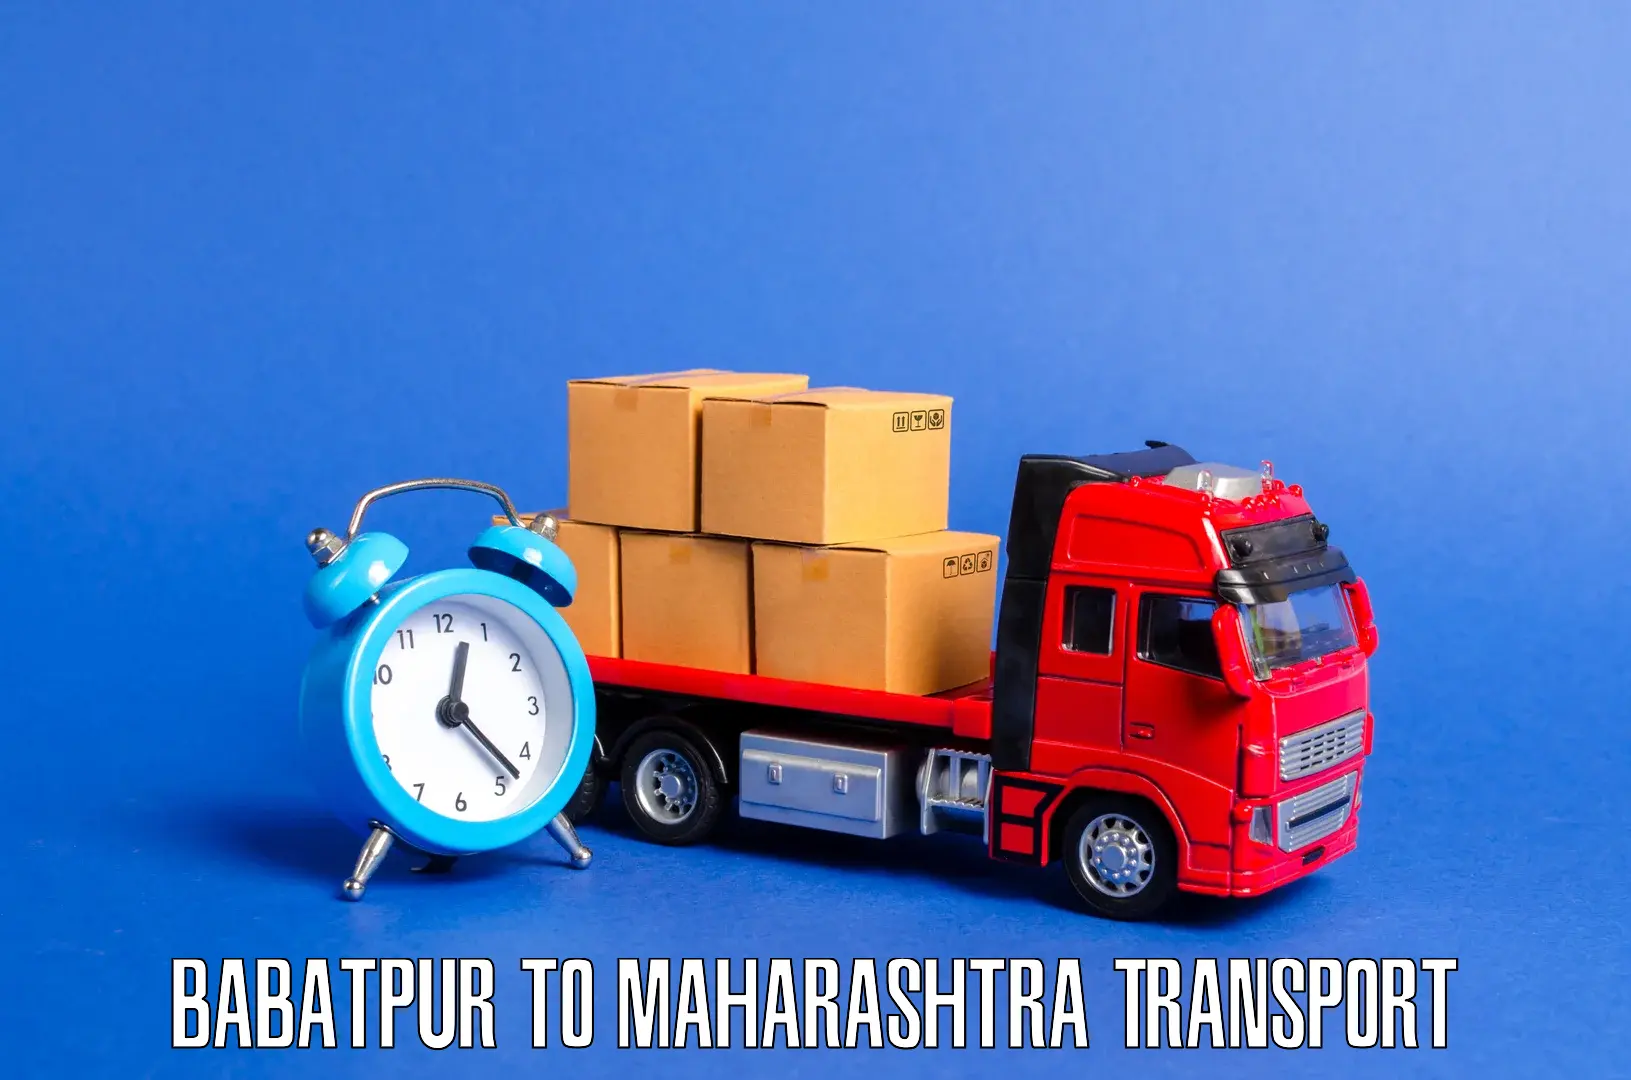 Truck transport companies in India Babatpur to Jamkhed